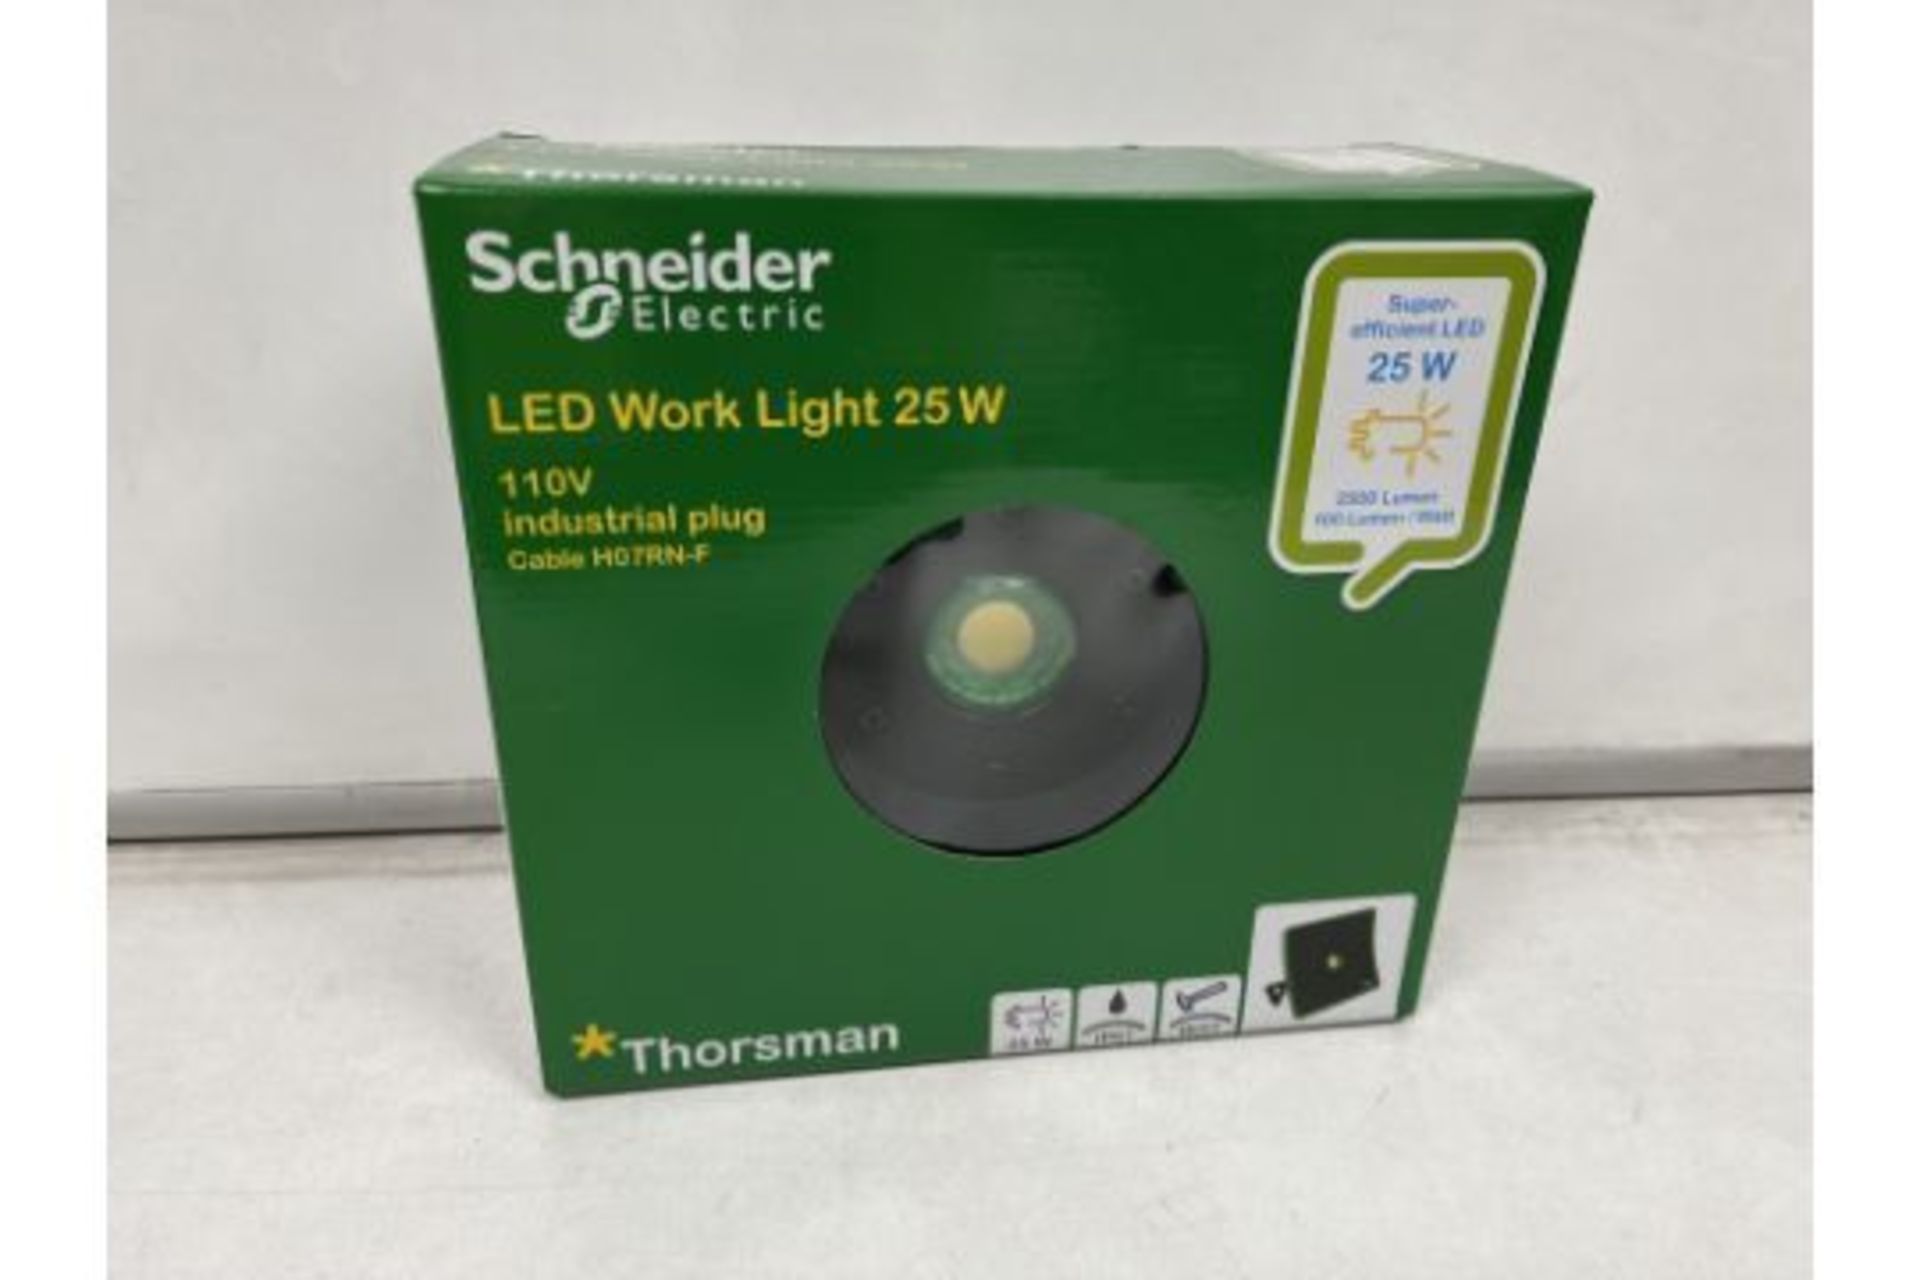 4 x NEW BOXED SCHNEIDER ELECTRIC LED WORK LIGHTS. 25W. 110V. CABLE H07RN-F. SUPER EFFICENT LED